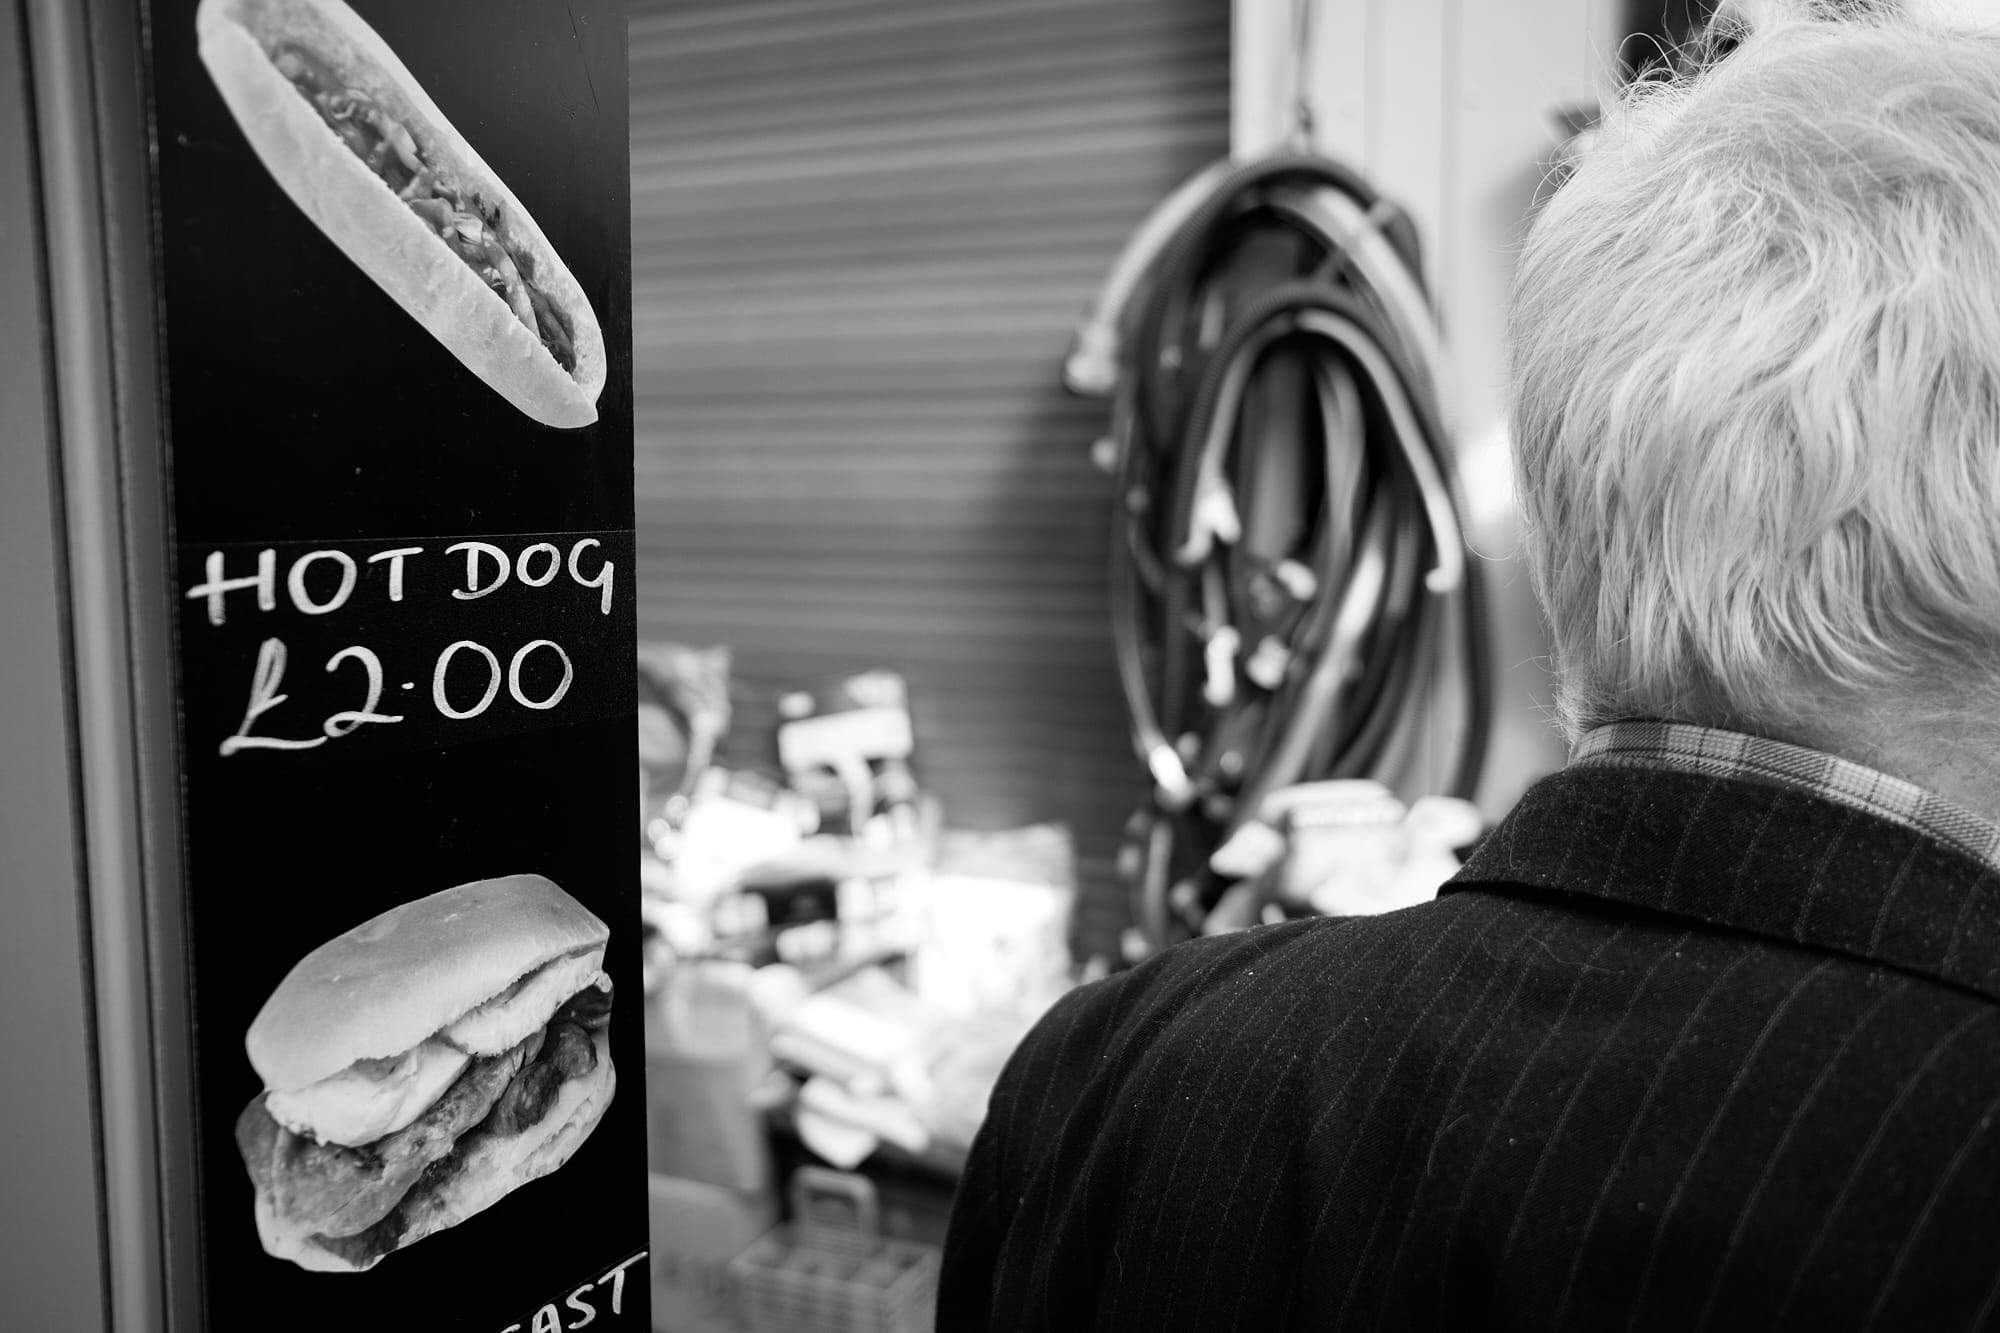 ‘Hot Dog’ sign and back of old man’s head